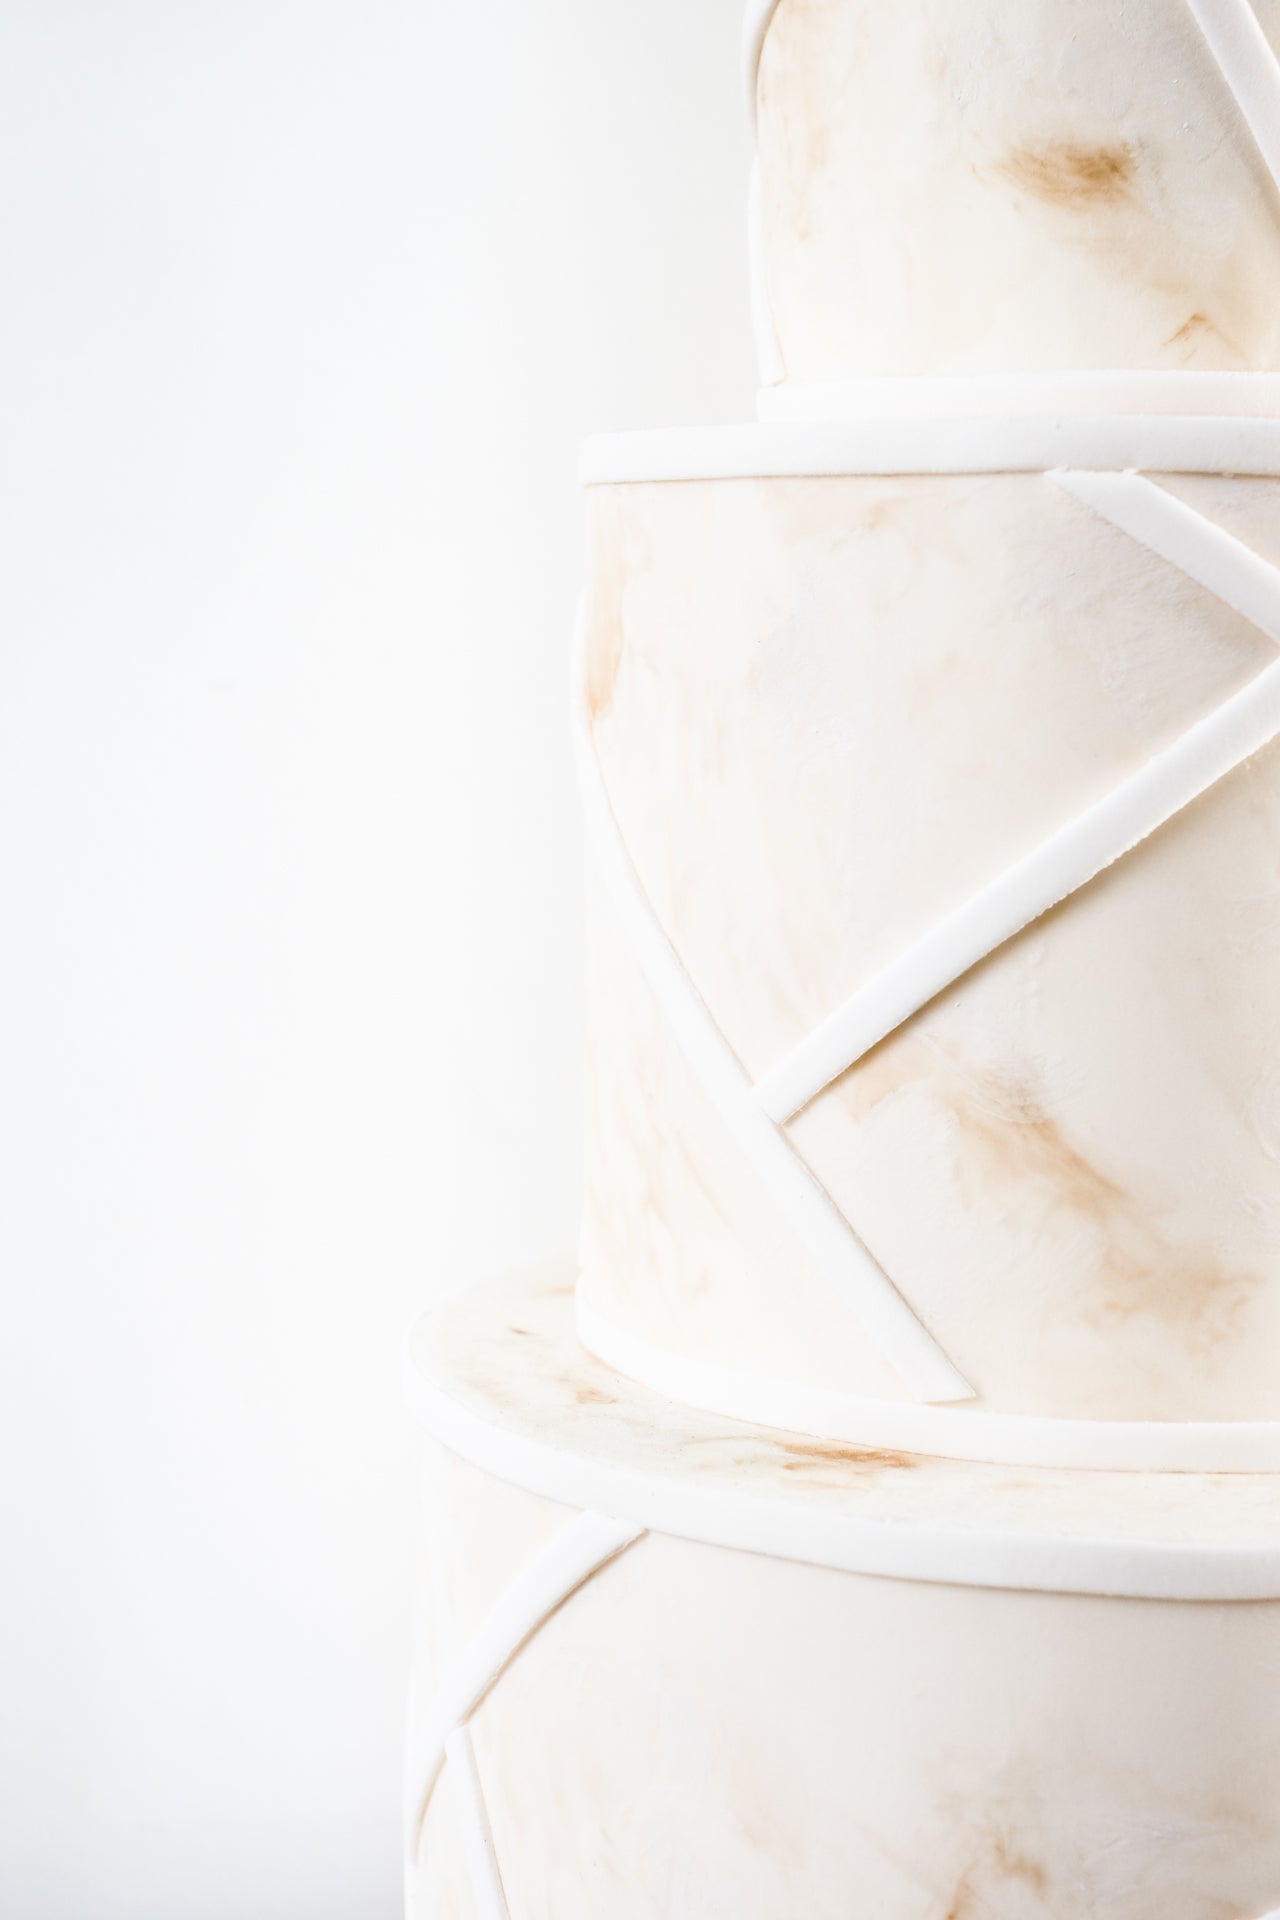 Coastal style modern, affordable wedding cake with a delicate spray of sugar flowers